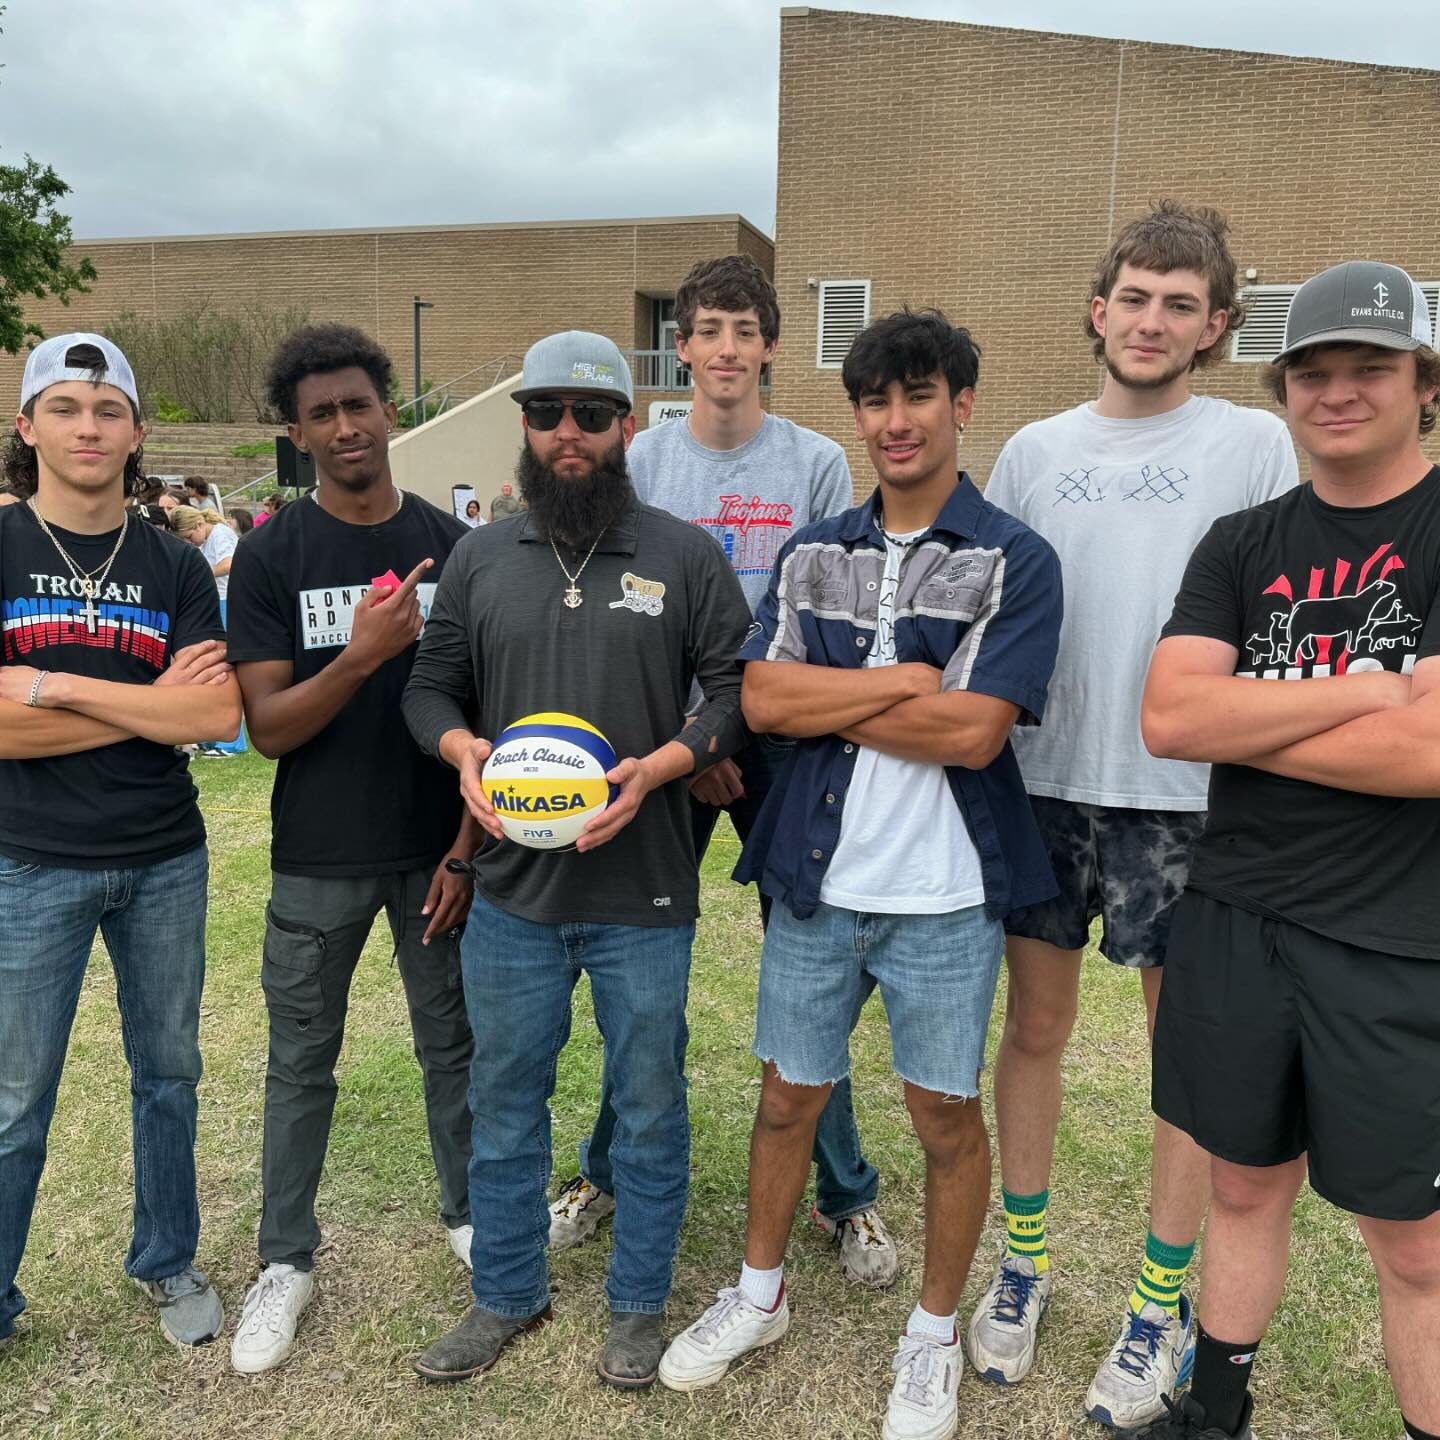 The Fun Day Volleyball tournament was very competitive this year! The Welding team, known as the &ldquo;Miller Killers,&rdquo; remained undefeated and clinched the first-place title. The team &ldquo;Loco Boys,&rdquo; comprising Diesel students and an